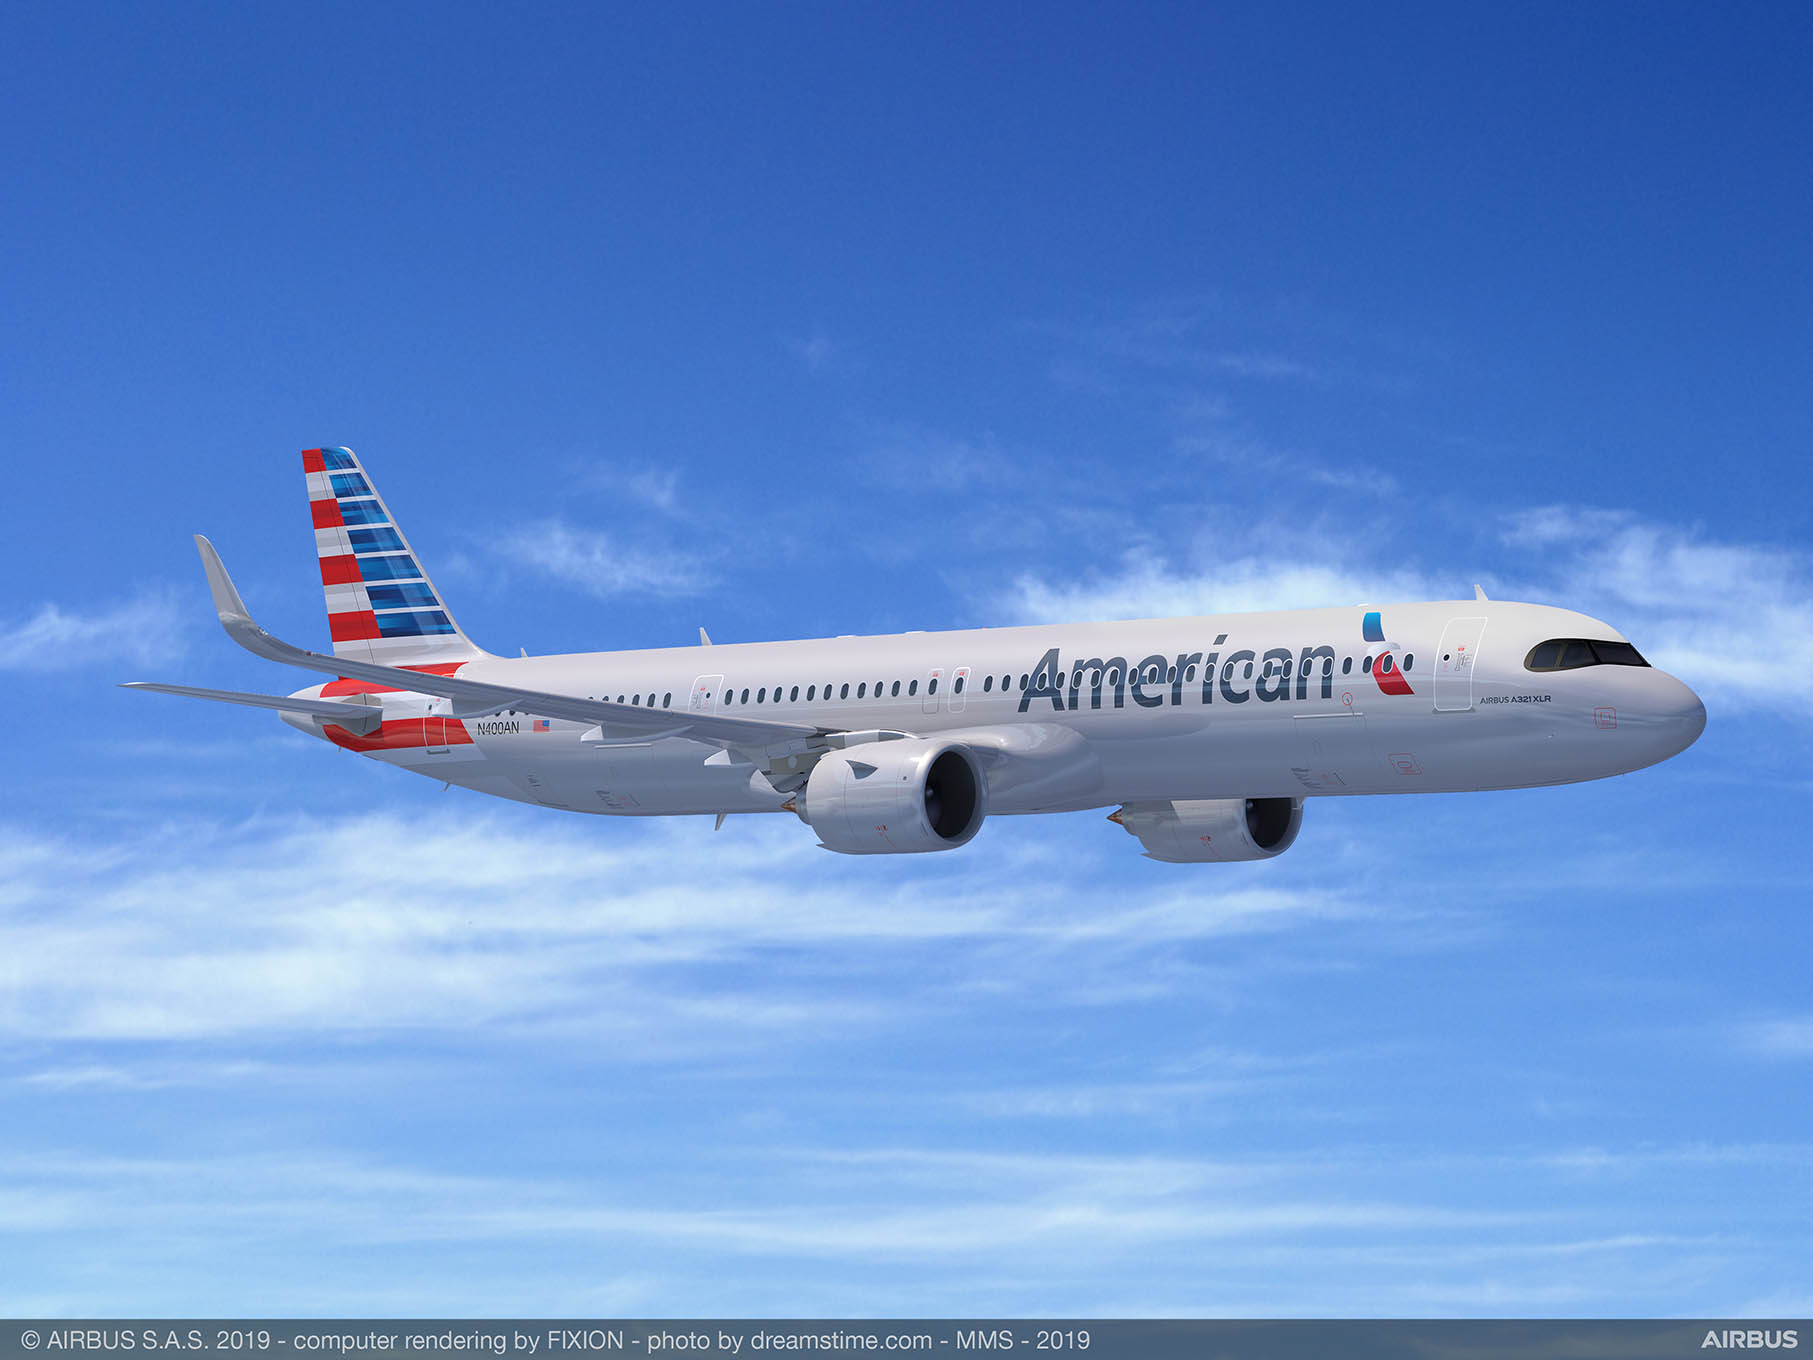 Silver and American launch codeshare agreement